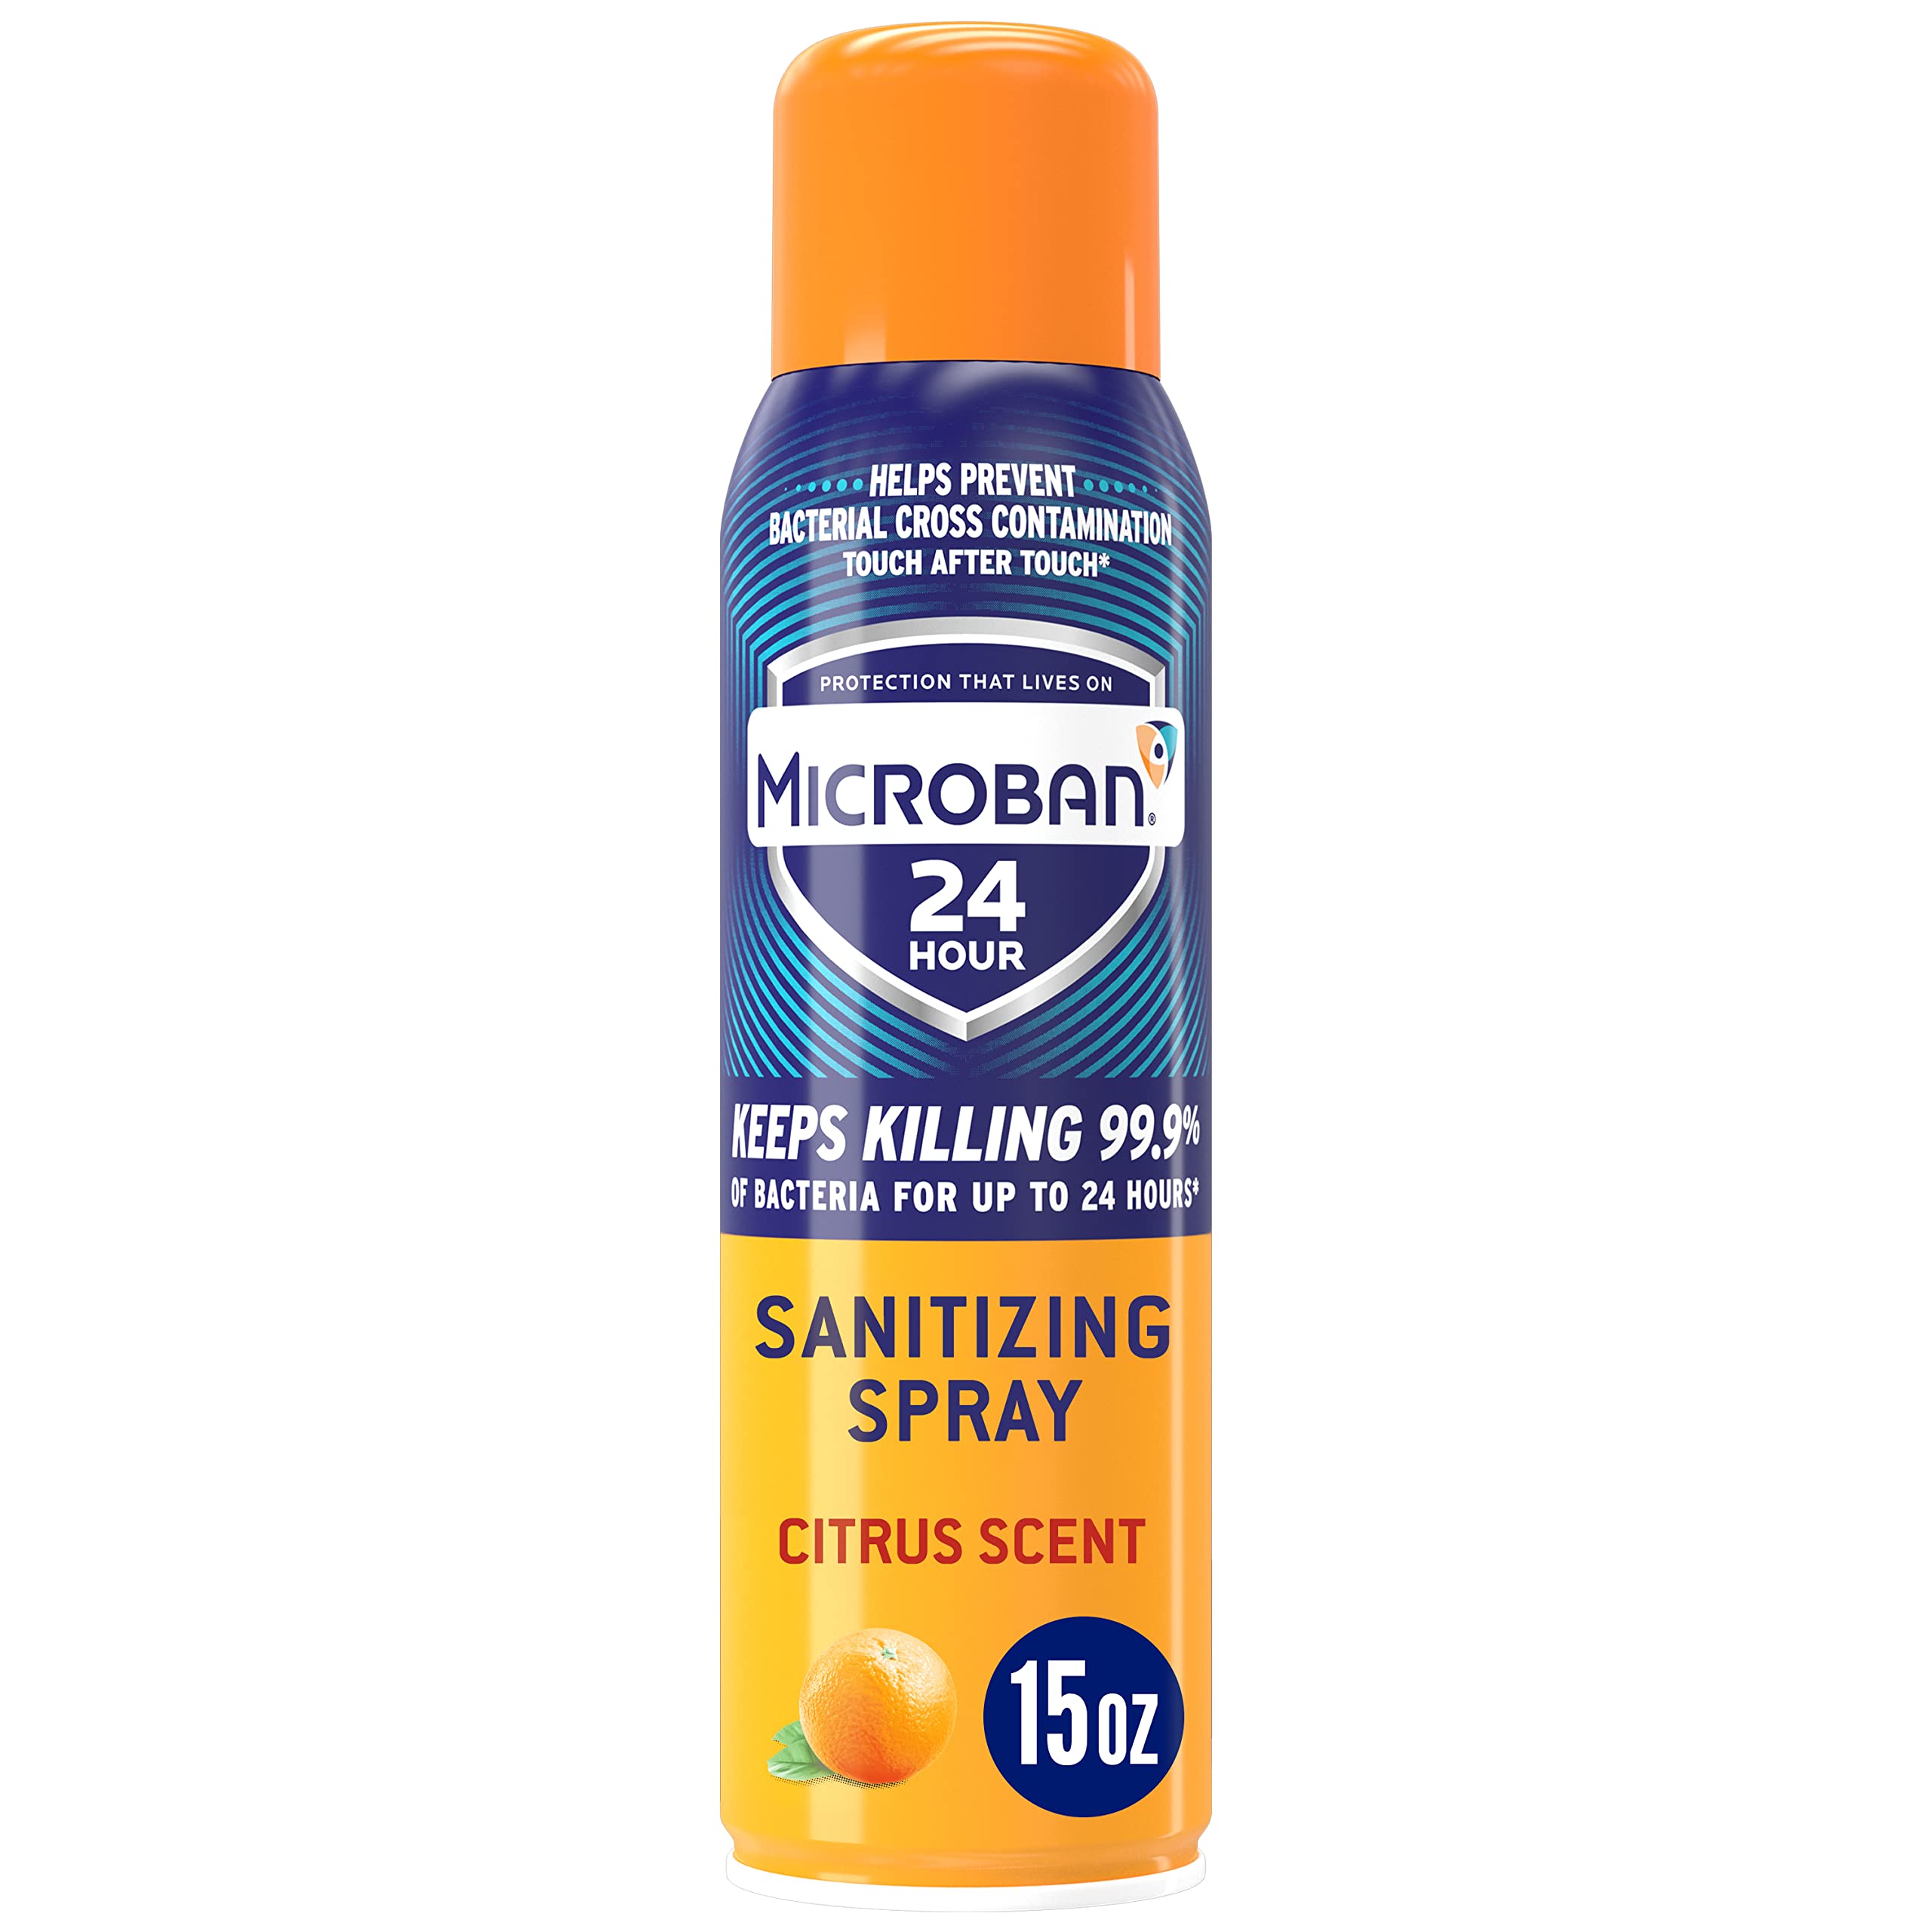 15-Oz Microban 24 Hour Sanitizing and Antibacterial Spray (Citrus) $1.97 w/ S&S + Free Shipping w/ Prime or on orders over $35